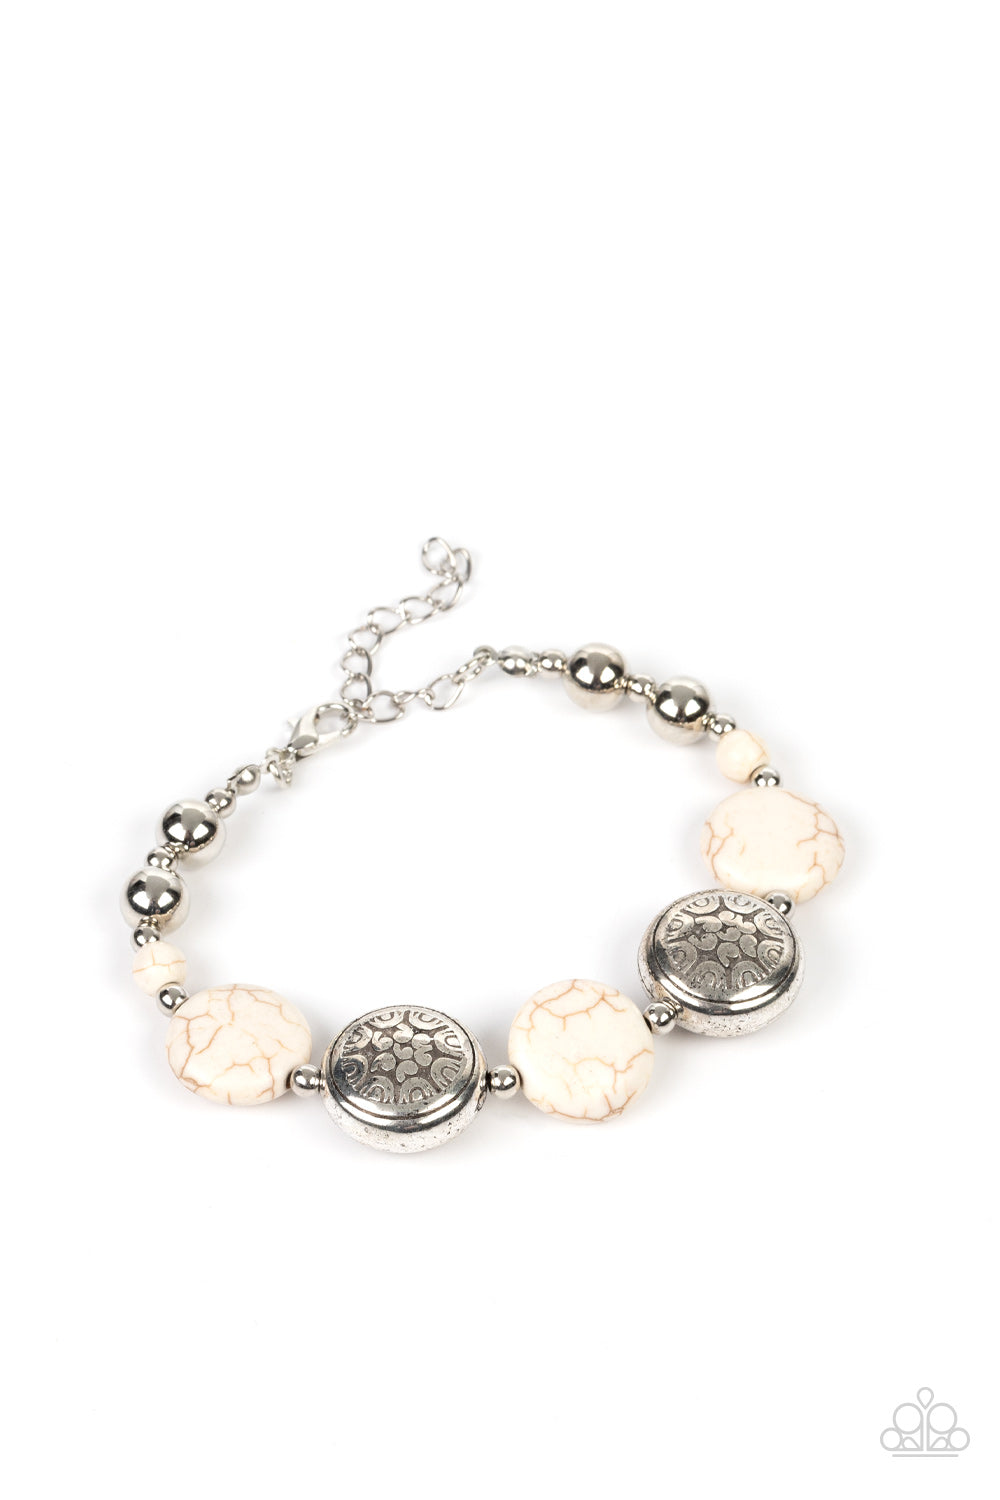 Oasis Orchard - White and Silver Bracelet - Paparazzi Accessories - Infused with silver beads and white stone accents, flat white stone beads alternate with floral silver frames along an invisible wire around the wrist for an earthy pop of color. Features an adjustable clasp closure. Sold as one individual bracelet.